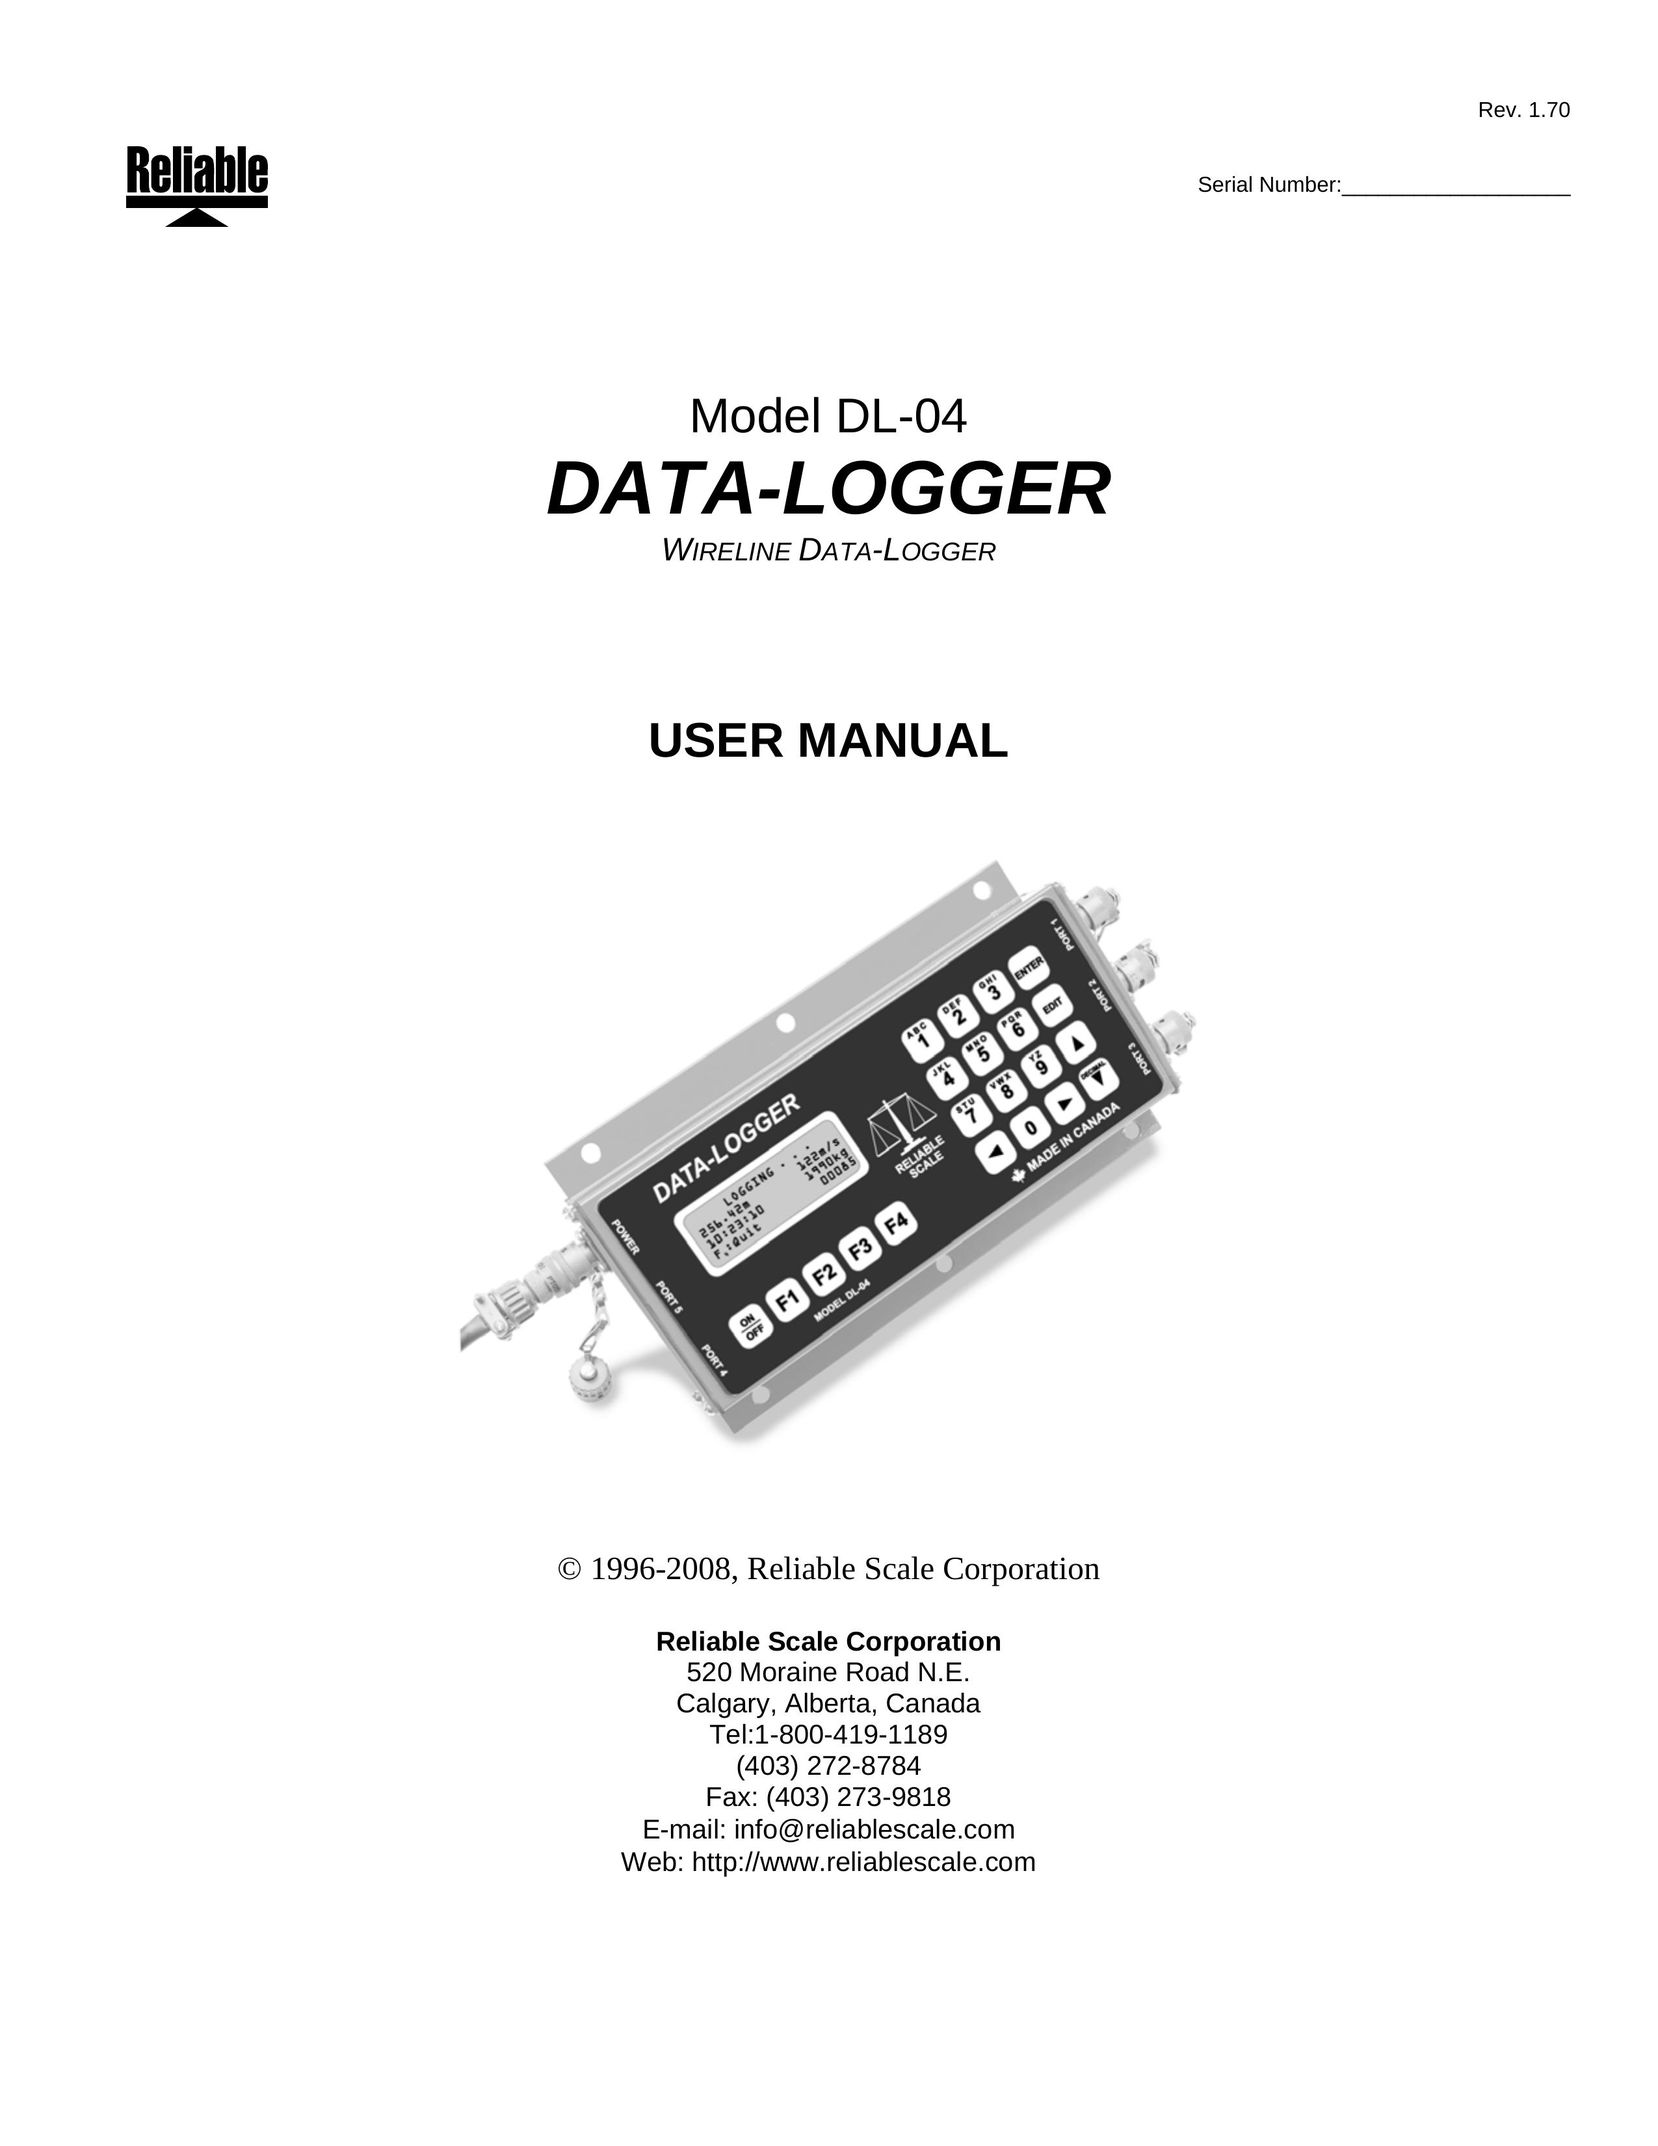 Reliable DL-04 Network Router User Manual